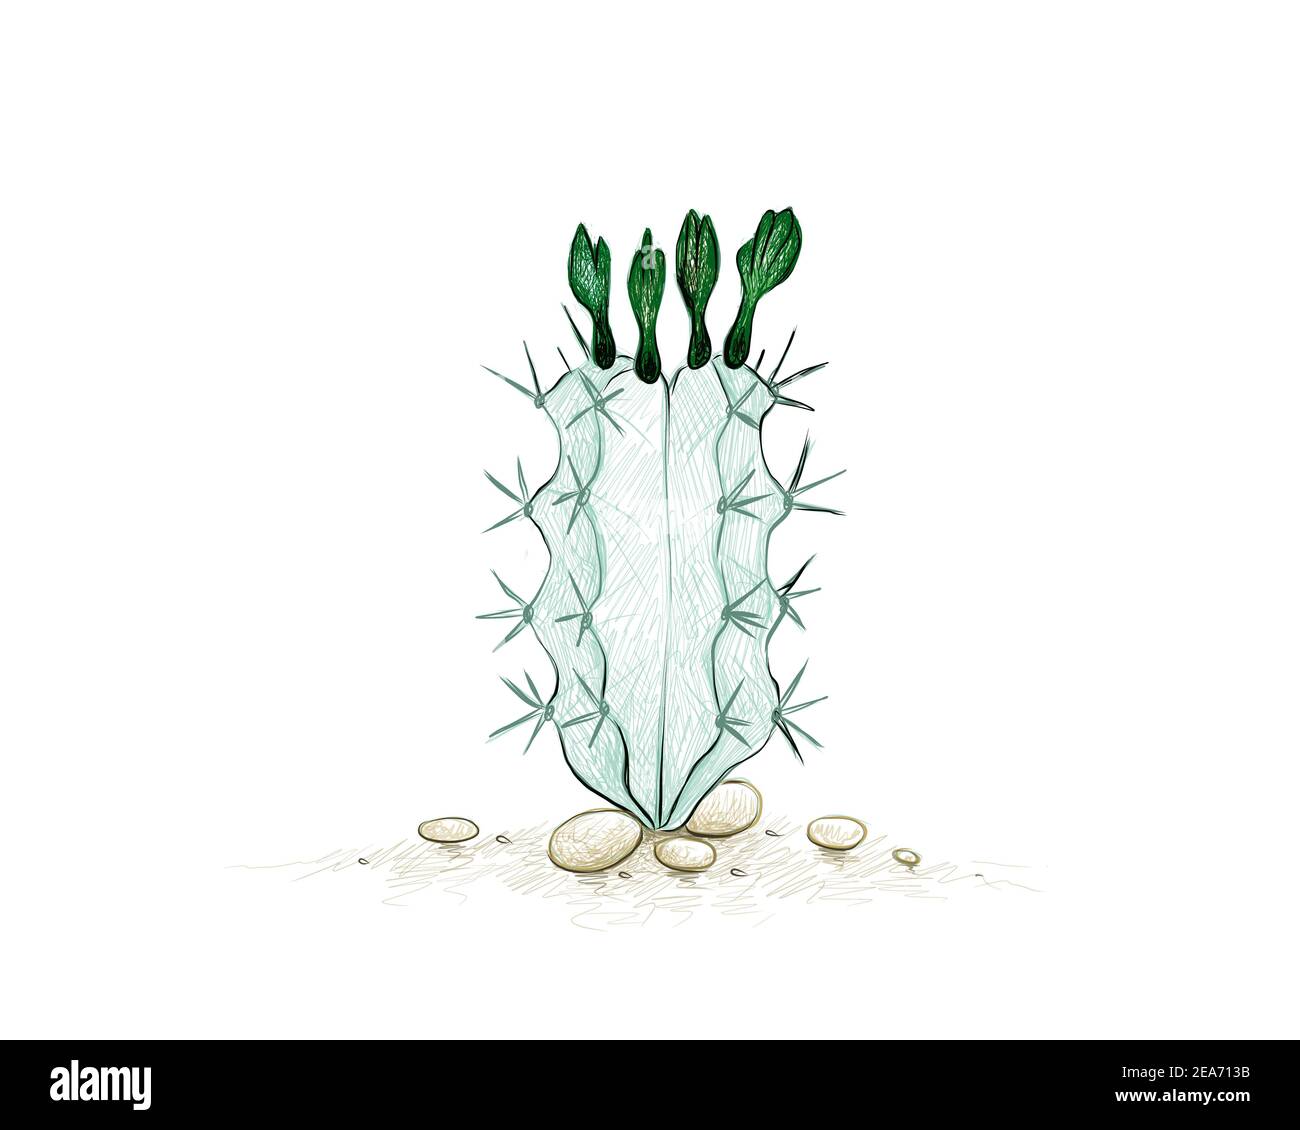 Illustration Hand Drawn Sketch of Stenocereus Cactus with Flowers. A Succulent Plants with Sharp Thorns for Garden Decoration. Stock Photo